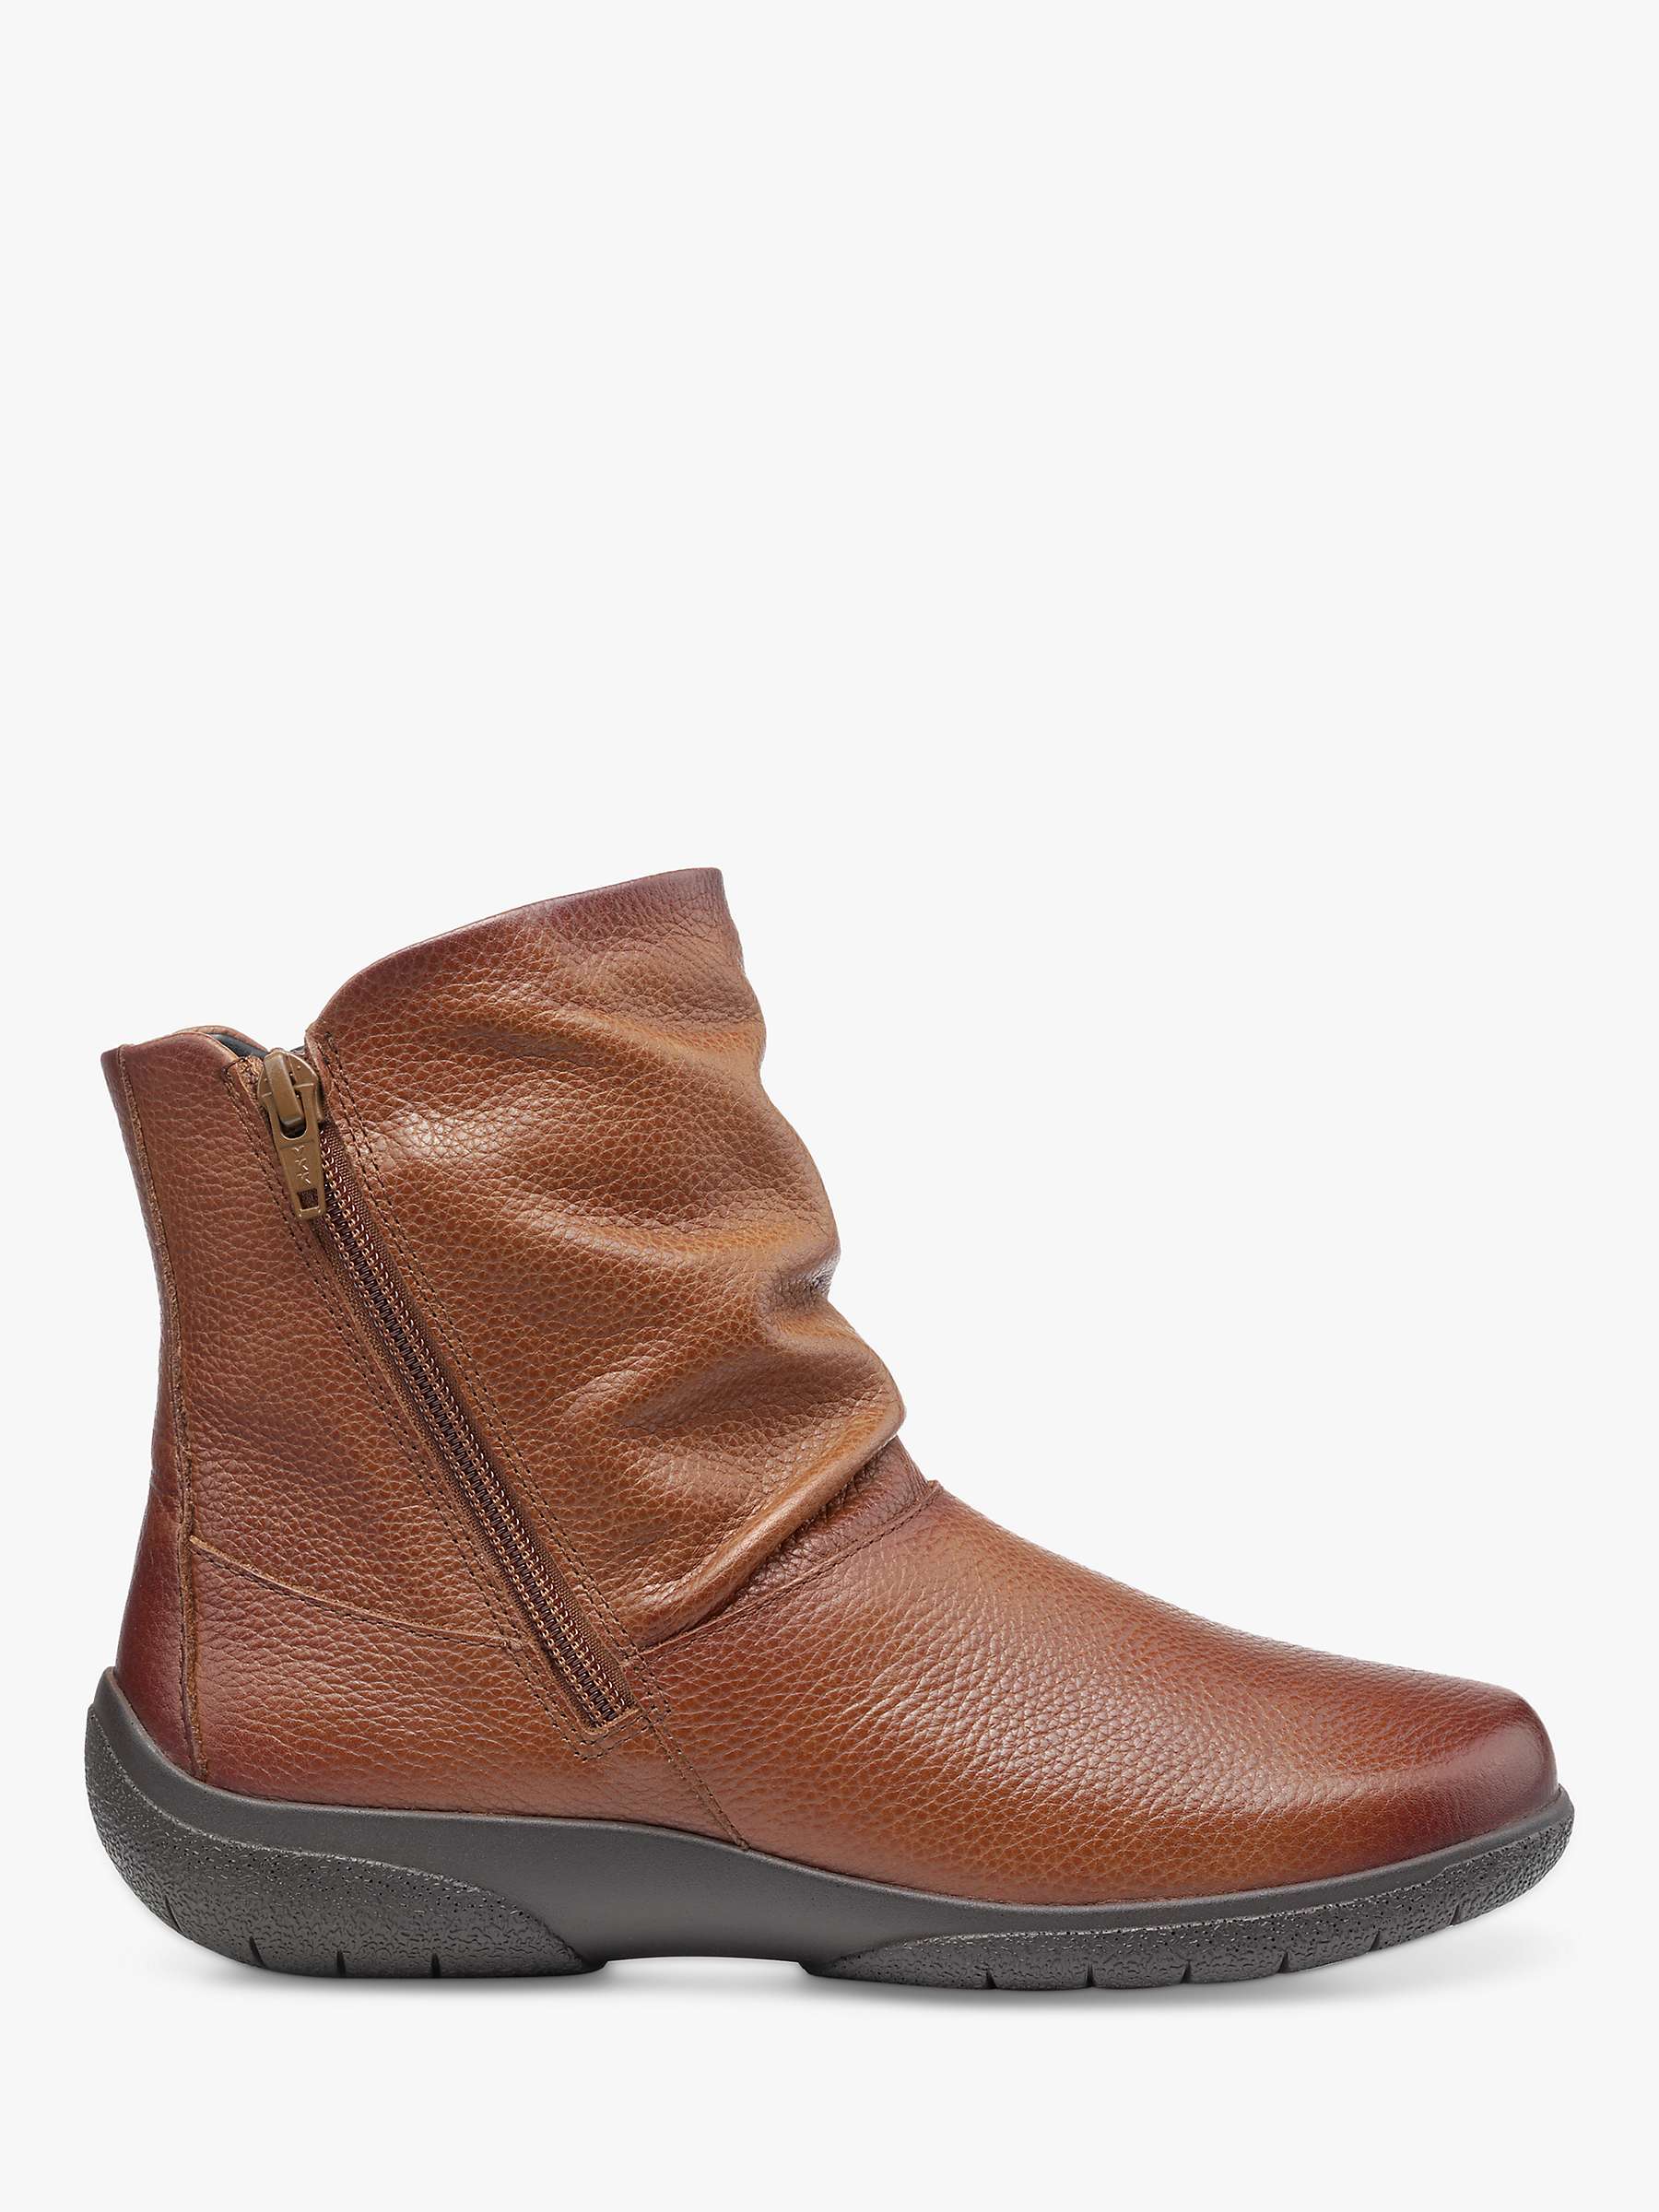 Buy Hotter Whisper Slouch Ankle Boots Online at johnlewis.com